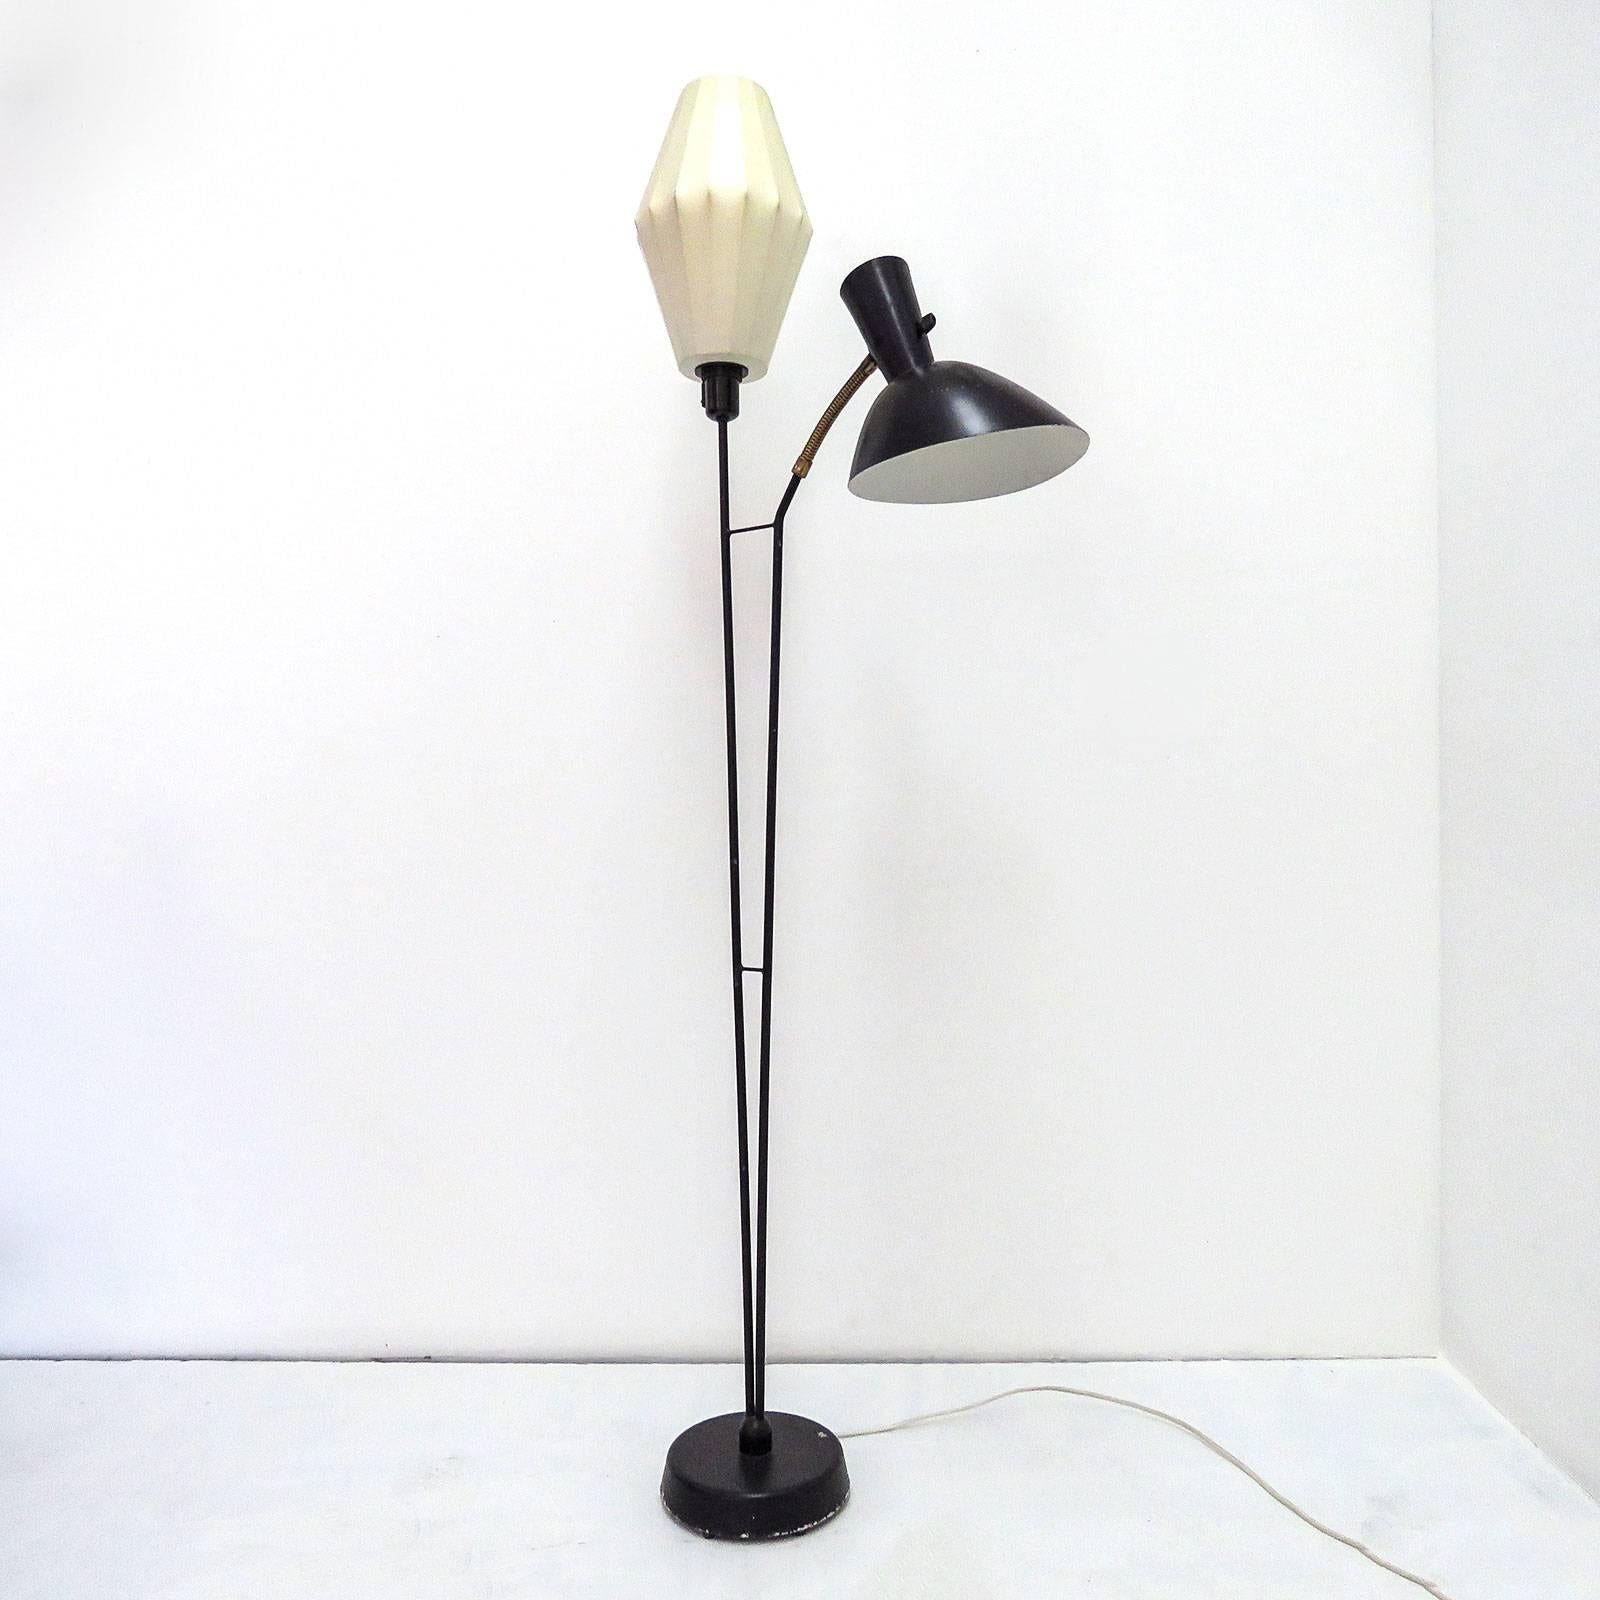 rare 1950's Swedish double arm floor lamp by Hans Bergström for Ateljé́ Lyktan in Åhus, Sweden, with one standing light with a resin cocoon shade and a down-light double cone metal shade with flexible brass arm and perforations to the shade,